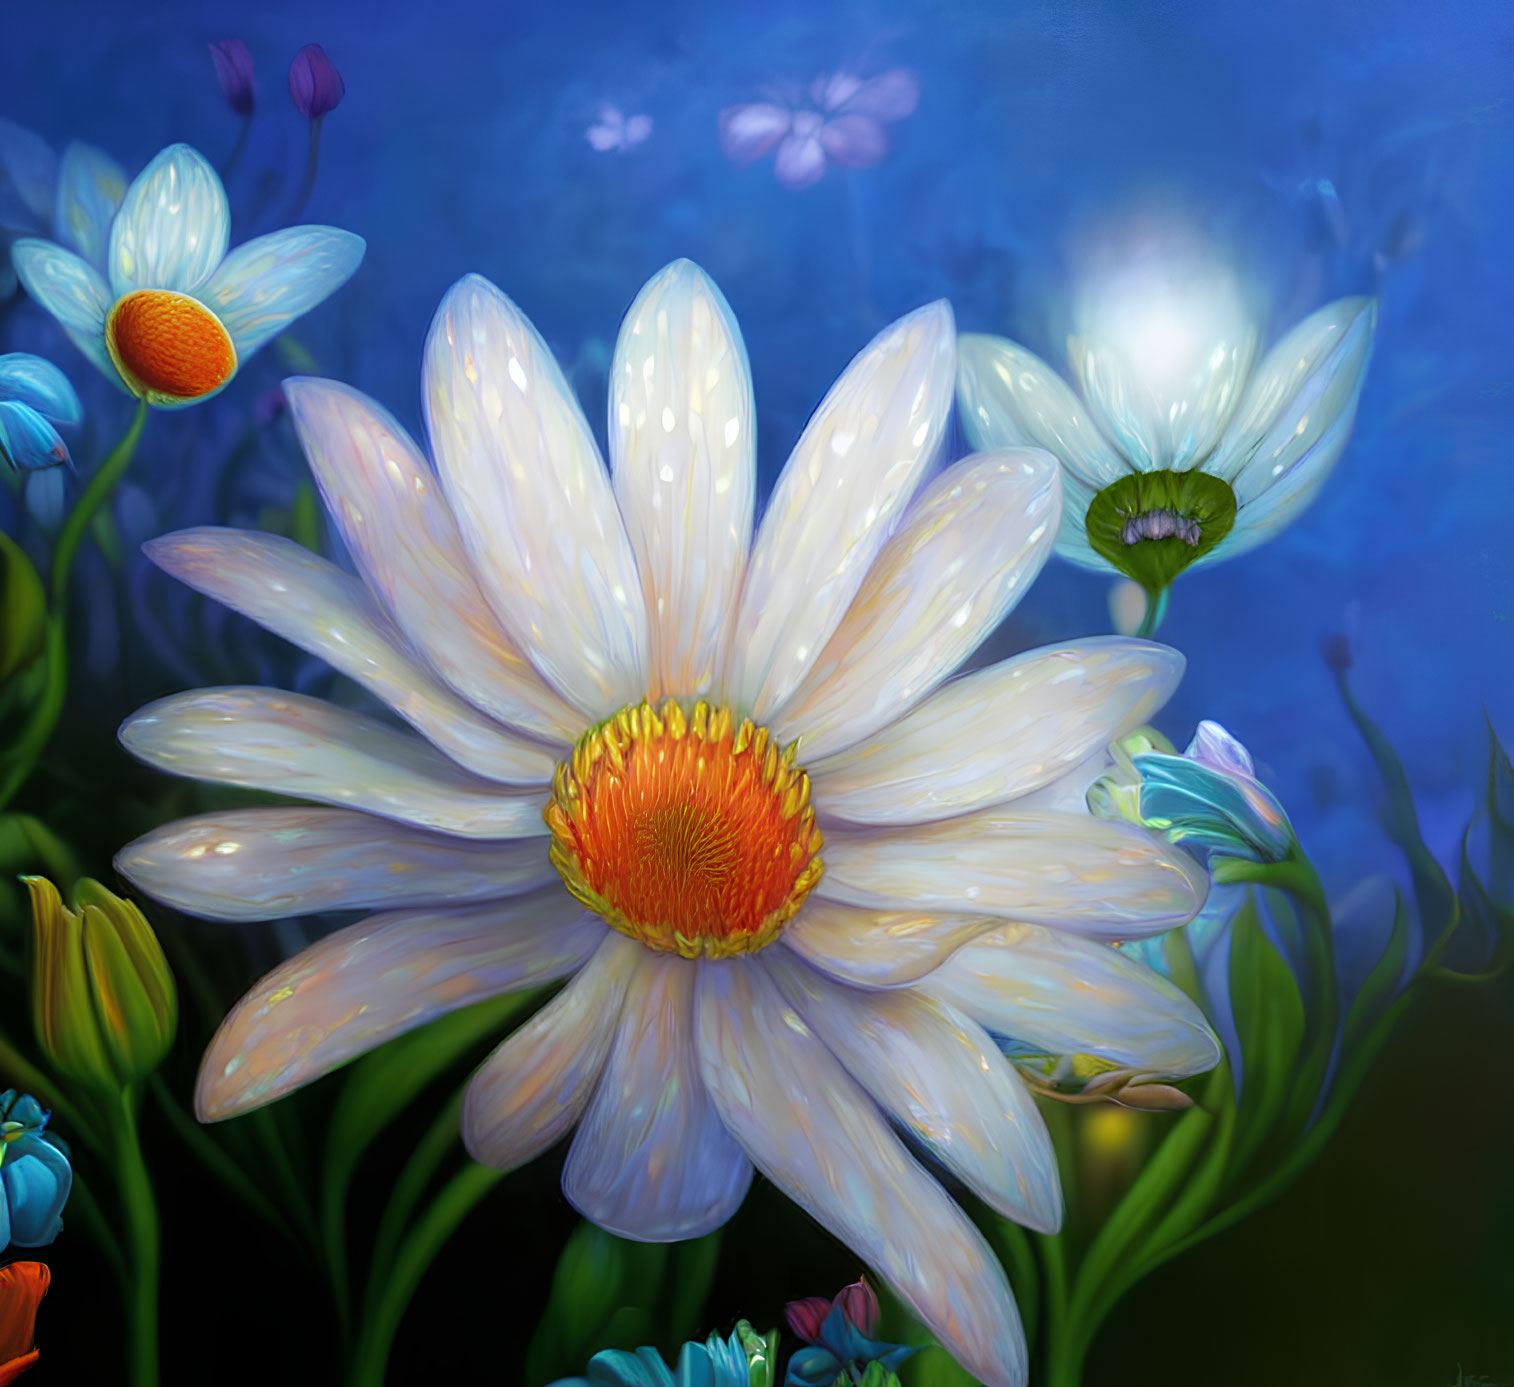 Colorful Flower and Butterfly Digital Painting with White Daisy